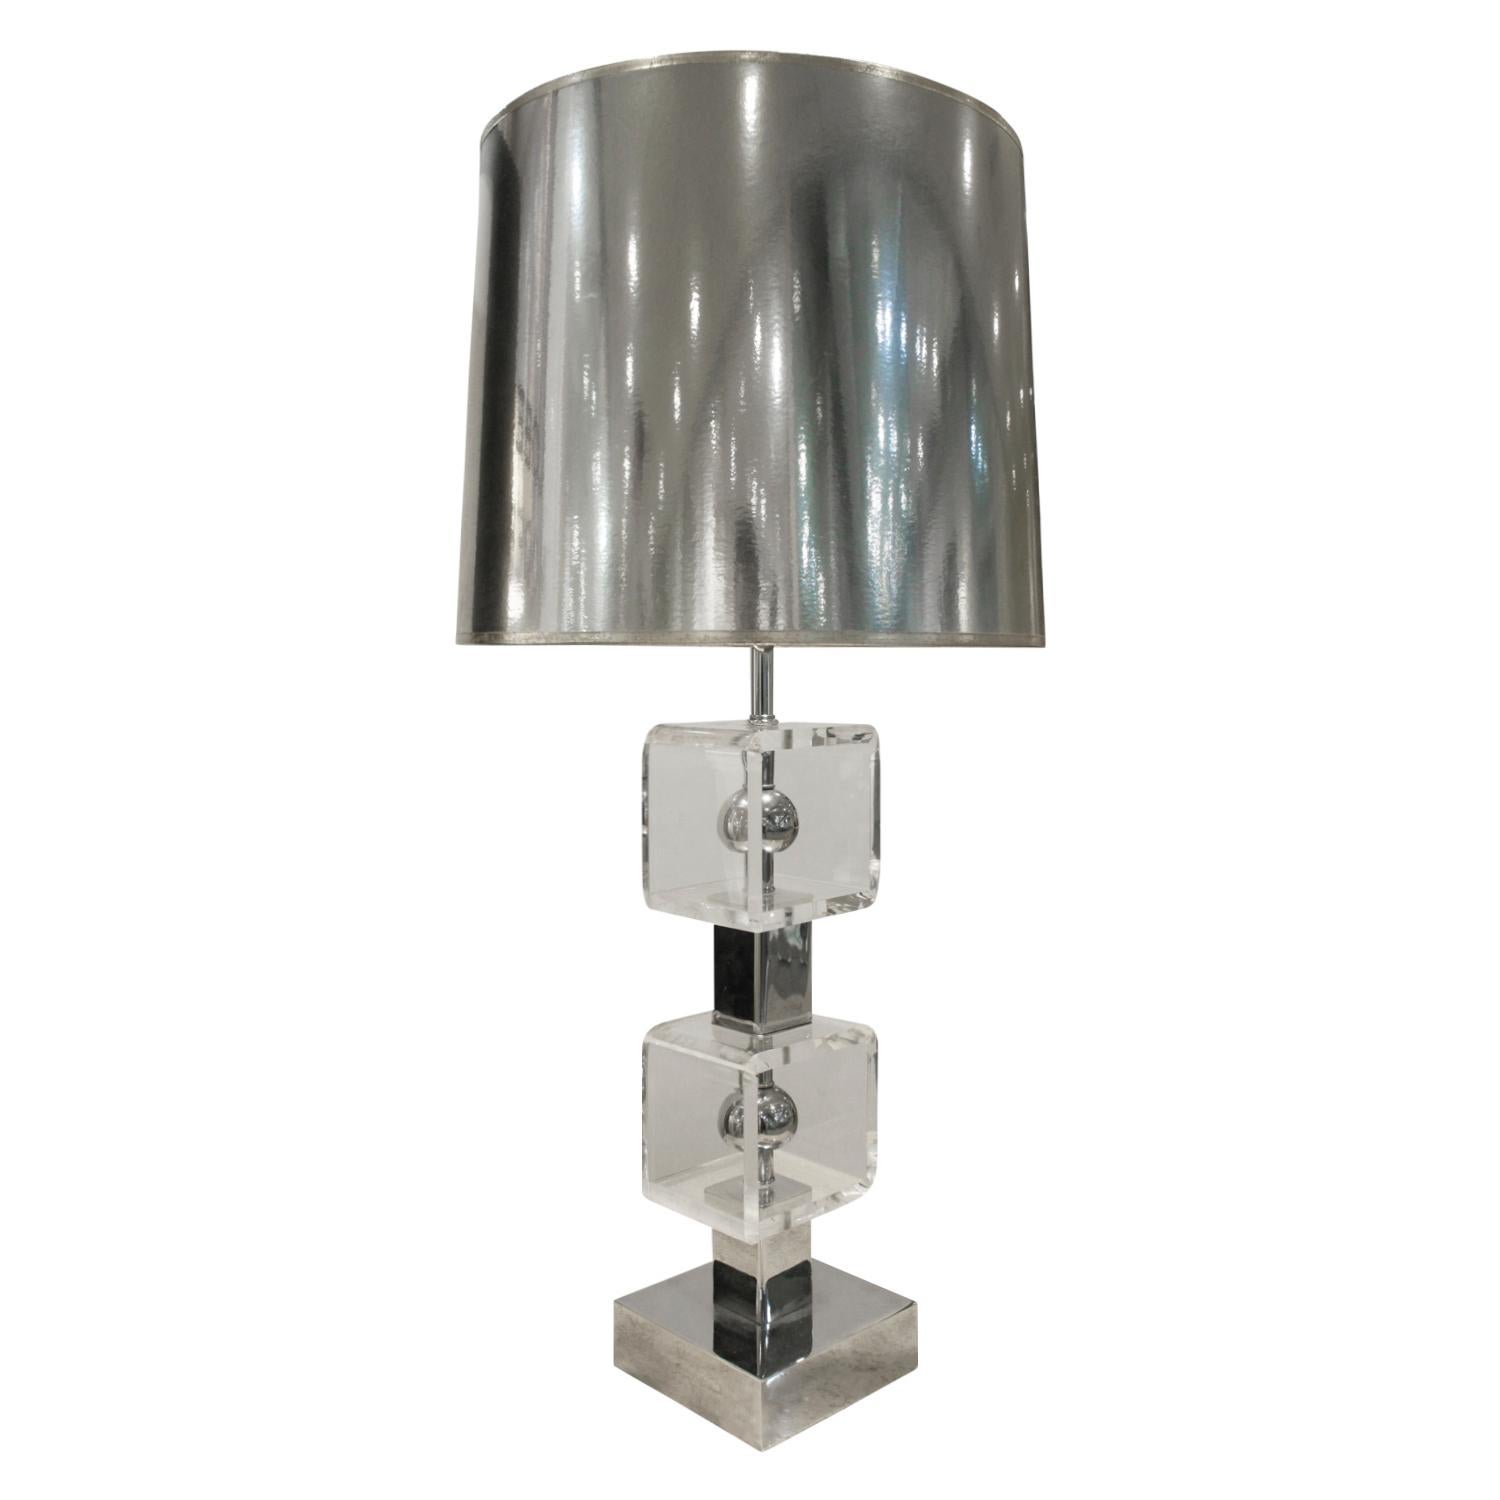 Table lamp in Lucite with chrome accents and silver paper shade, American, 1970s. This lamp is both sculptural and chic.